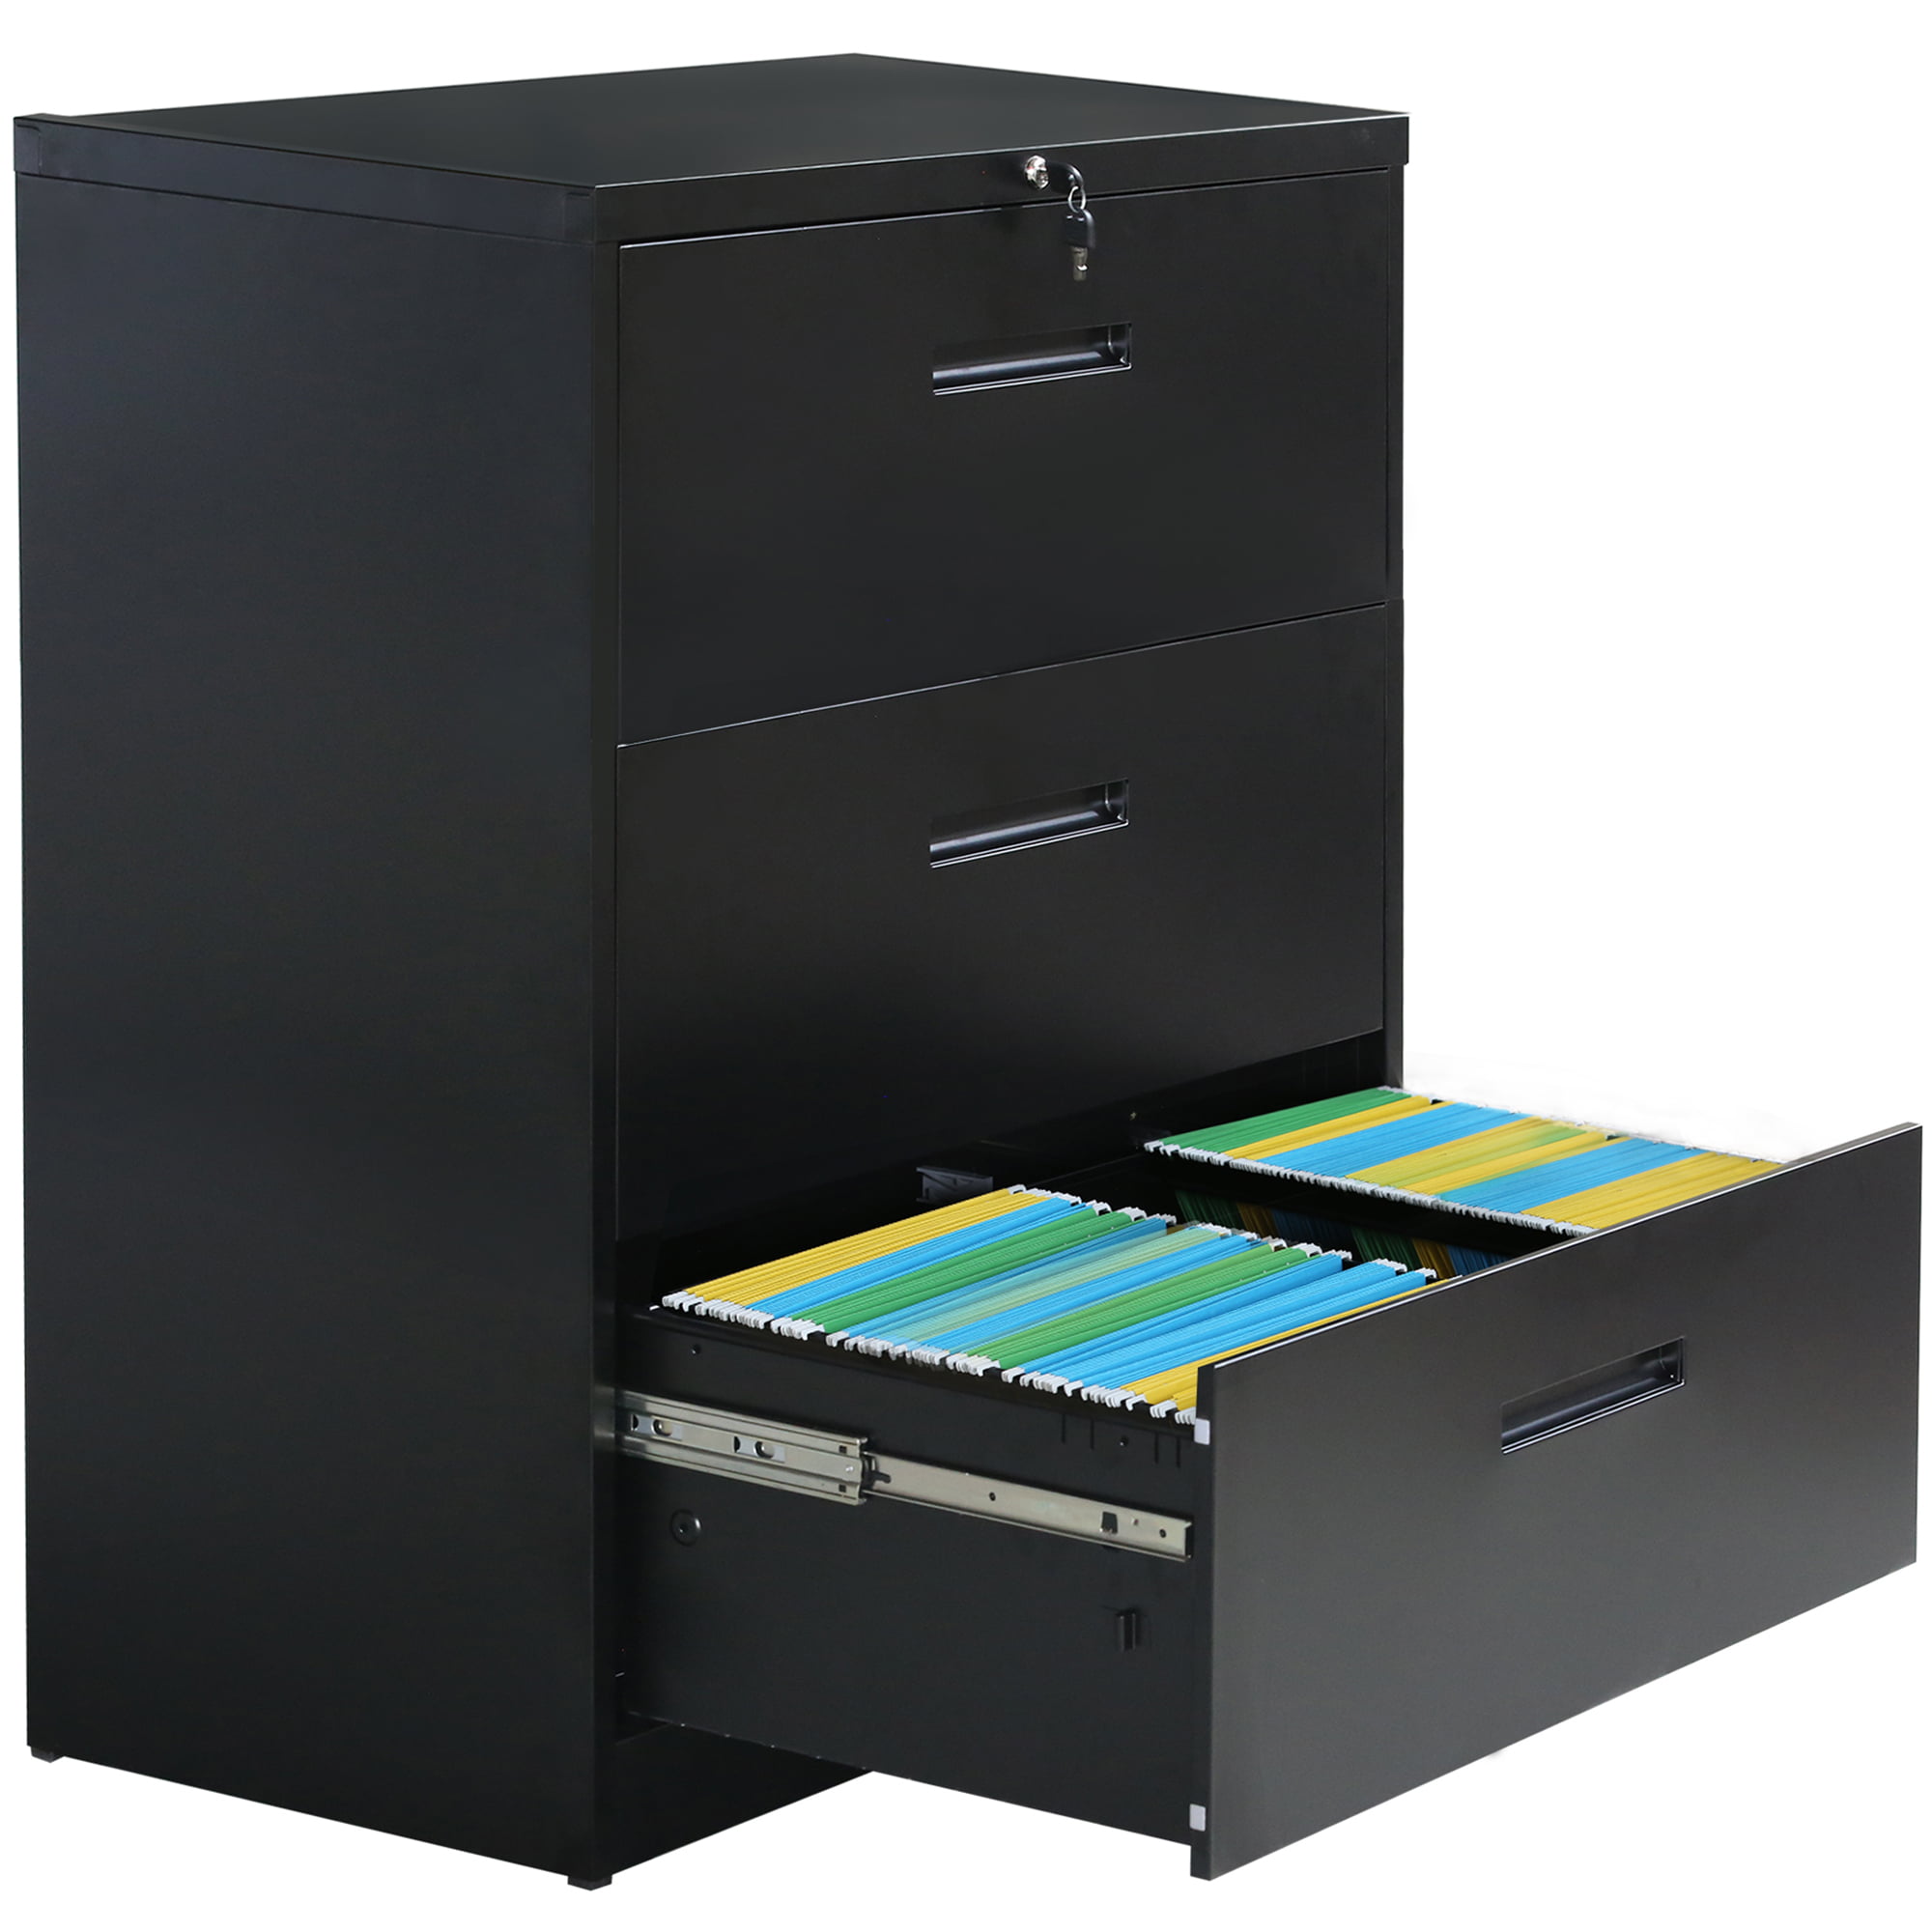 Heavy Duty Lateral Filing Cabinet with Lock,Steel Construction Lateral File Cabinet 